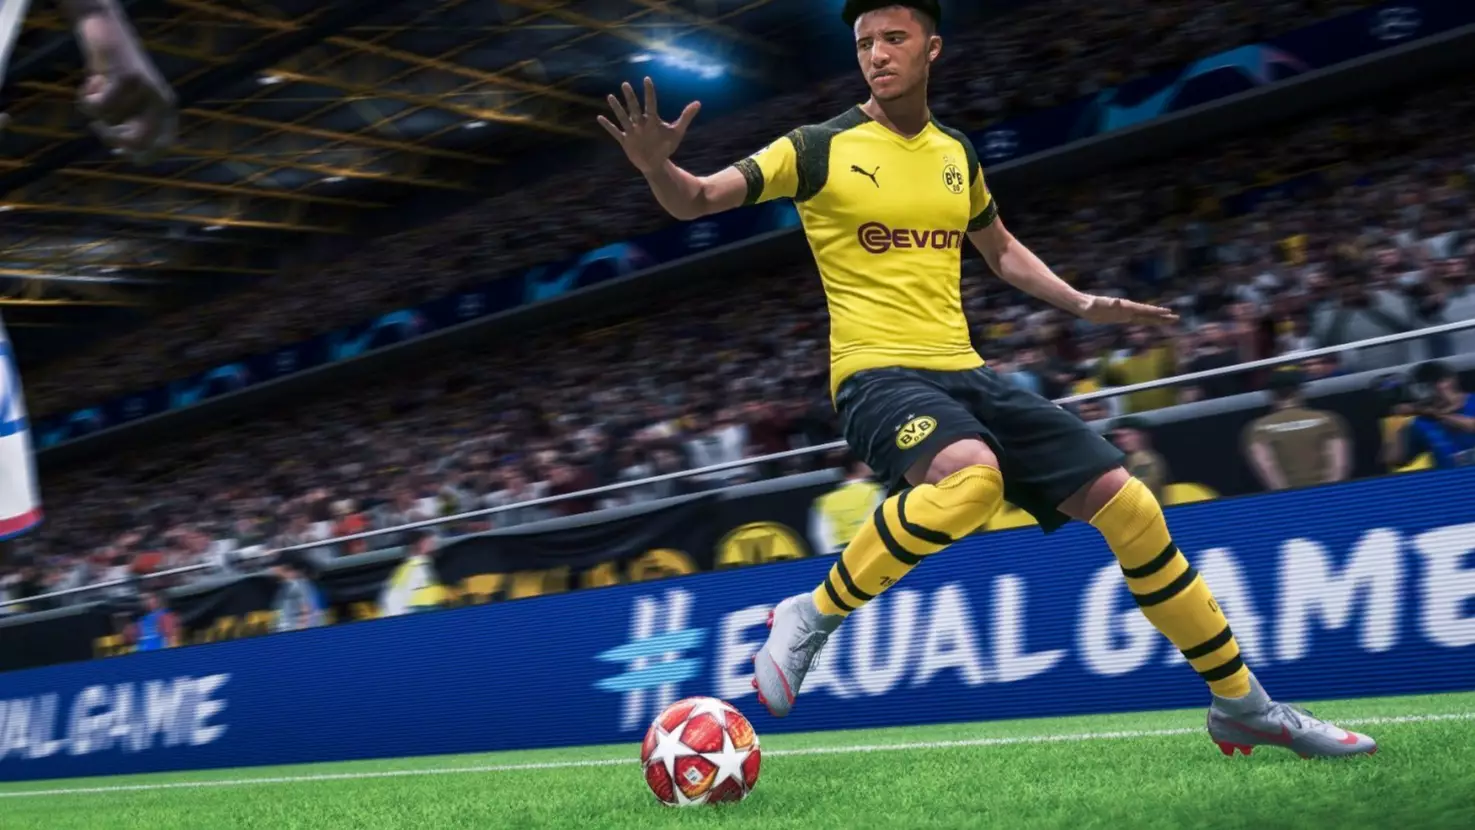 Jadon Sancho will be tricker than ever in FIFA 20